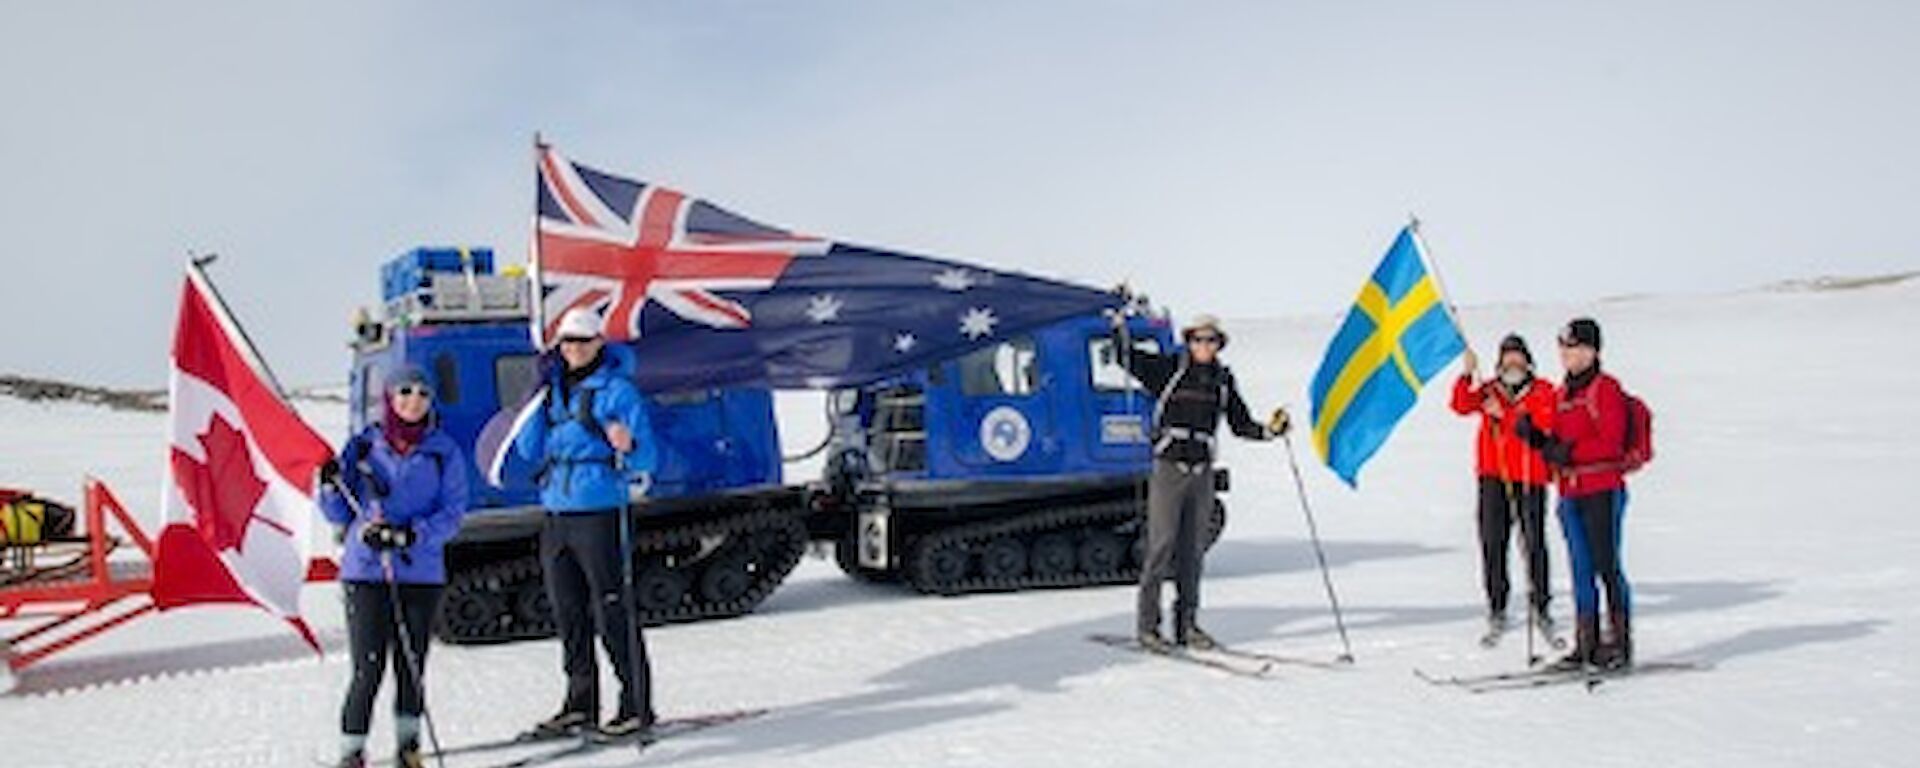 Five expeditioners on skis holding up the Australian, Canadian and Swedish flag in front of a blue Hagglund.